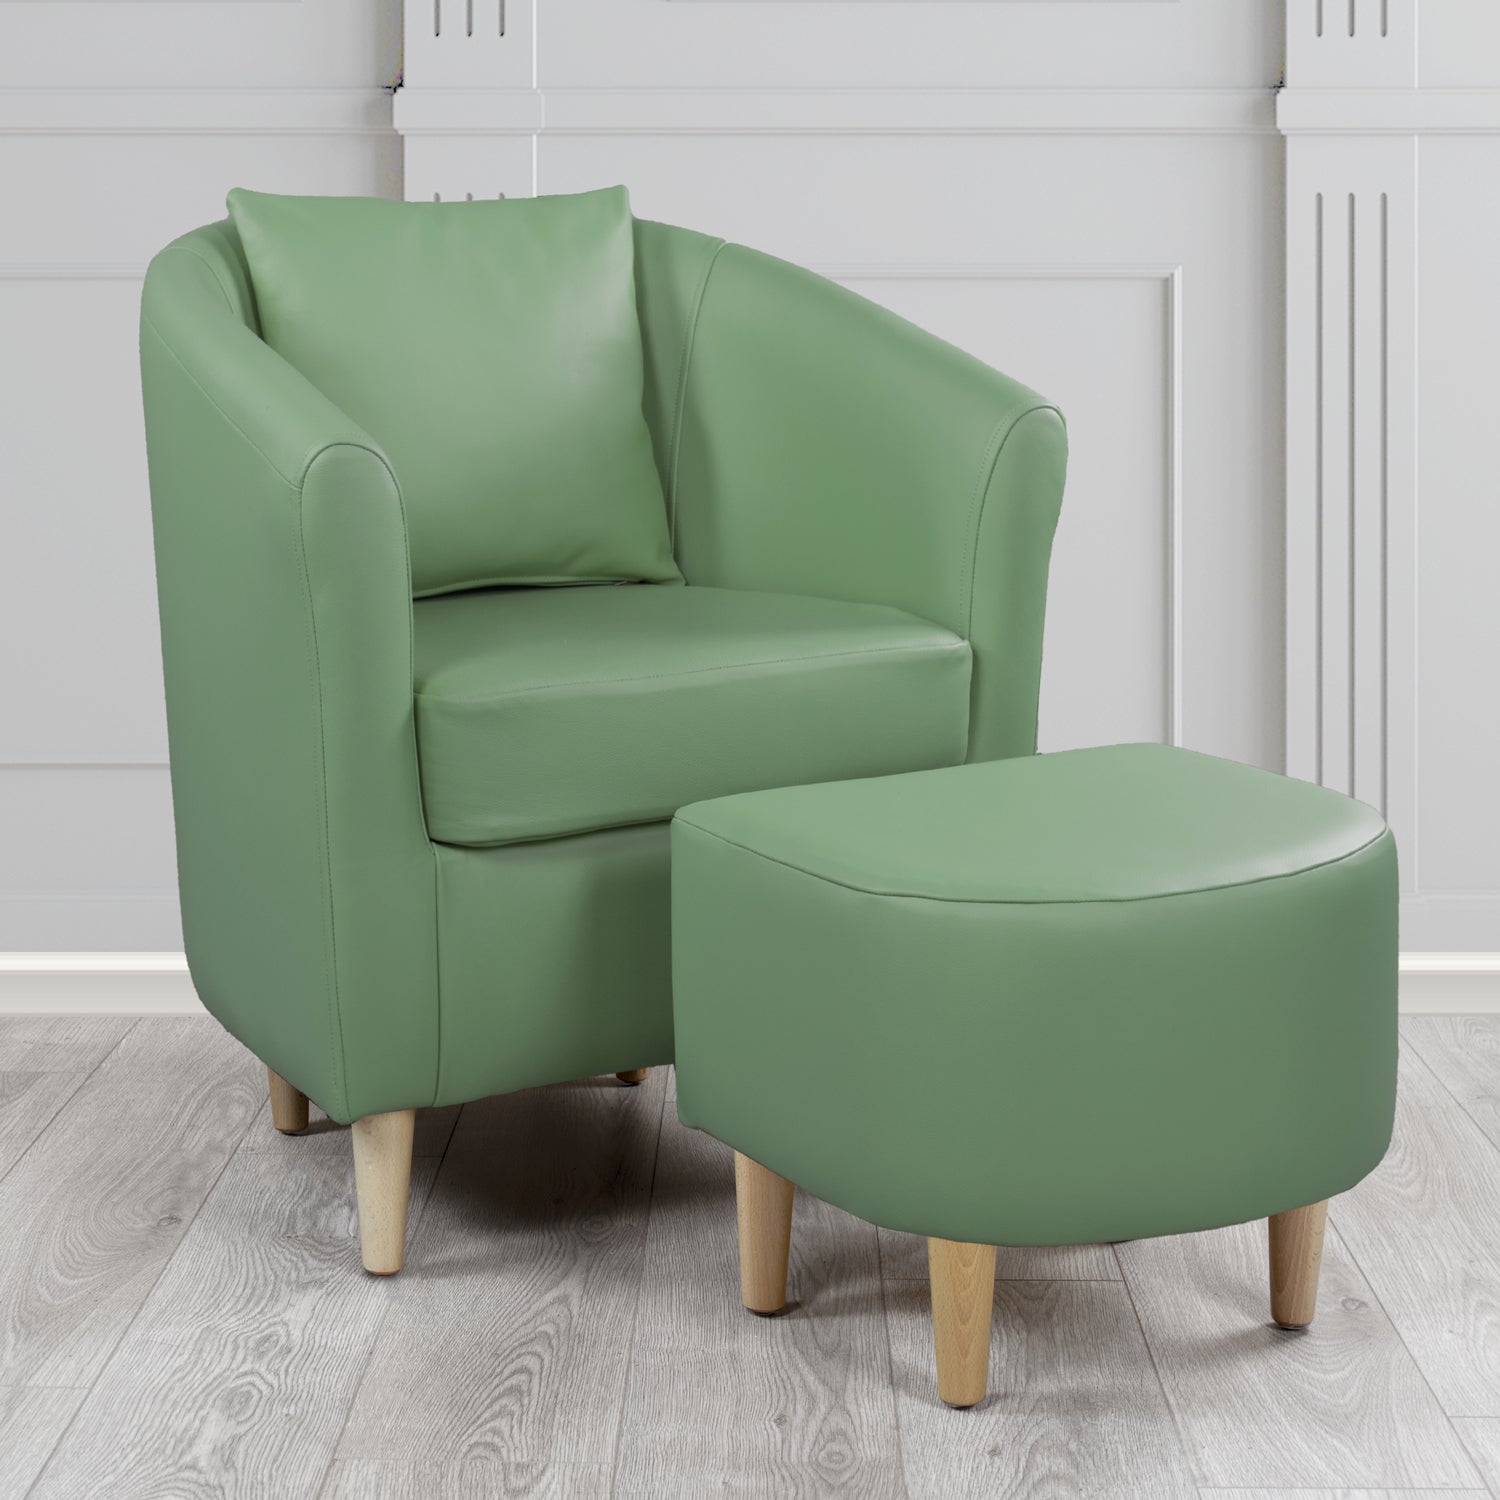 St Tropez Shelly Lichen Crib 5 Genuine Leather Tub Chair & Footstool Set With Scatter Cushion (6619503132714)